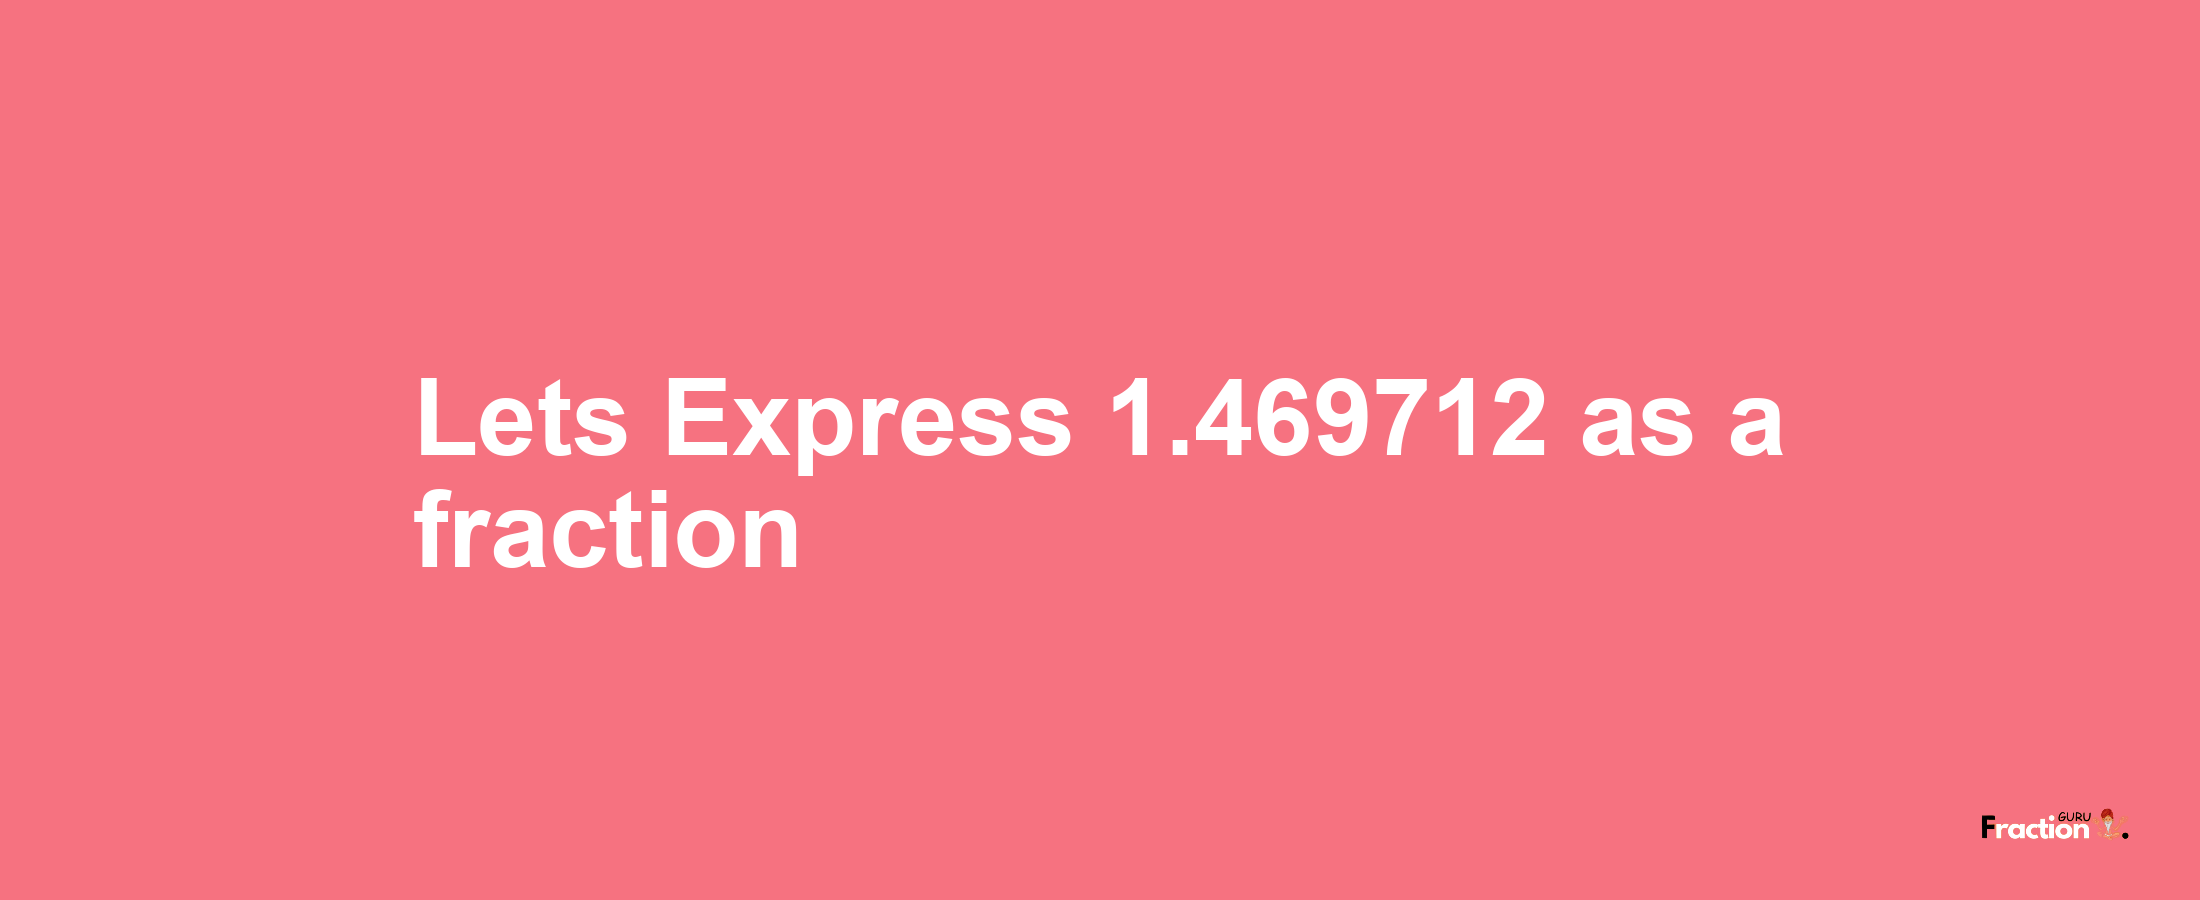 Lets Express 1.469712 as afraction